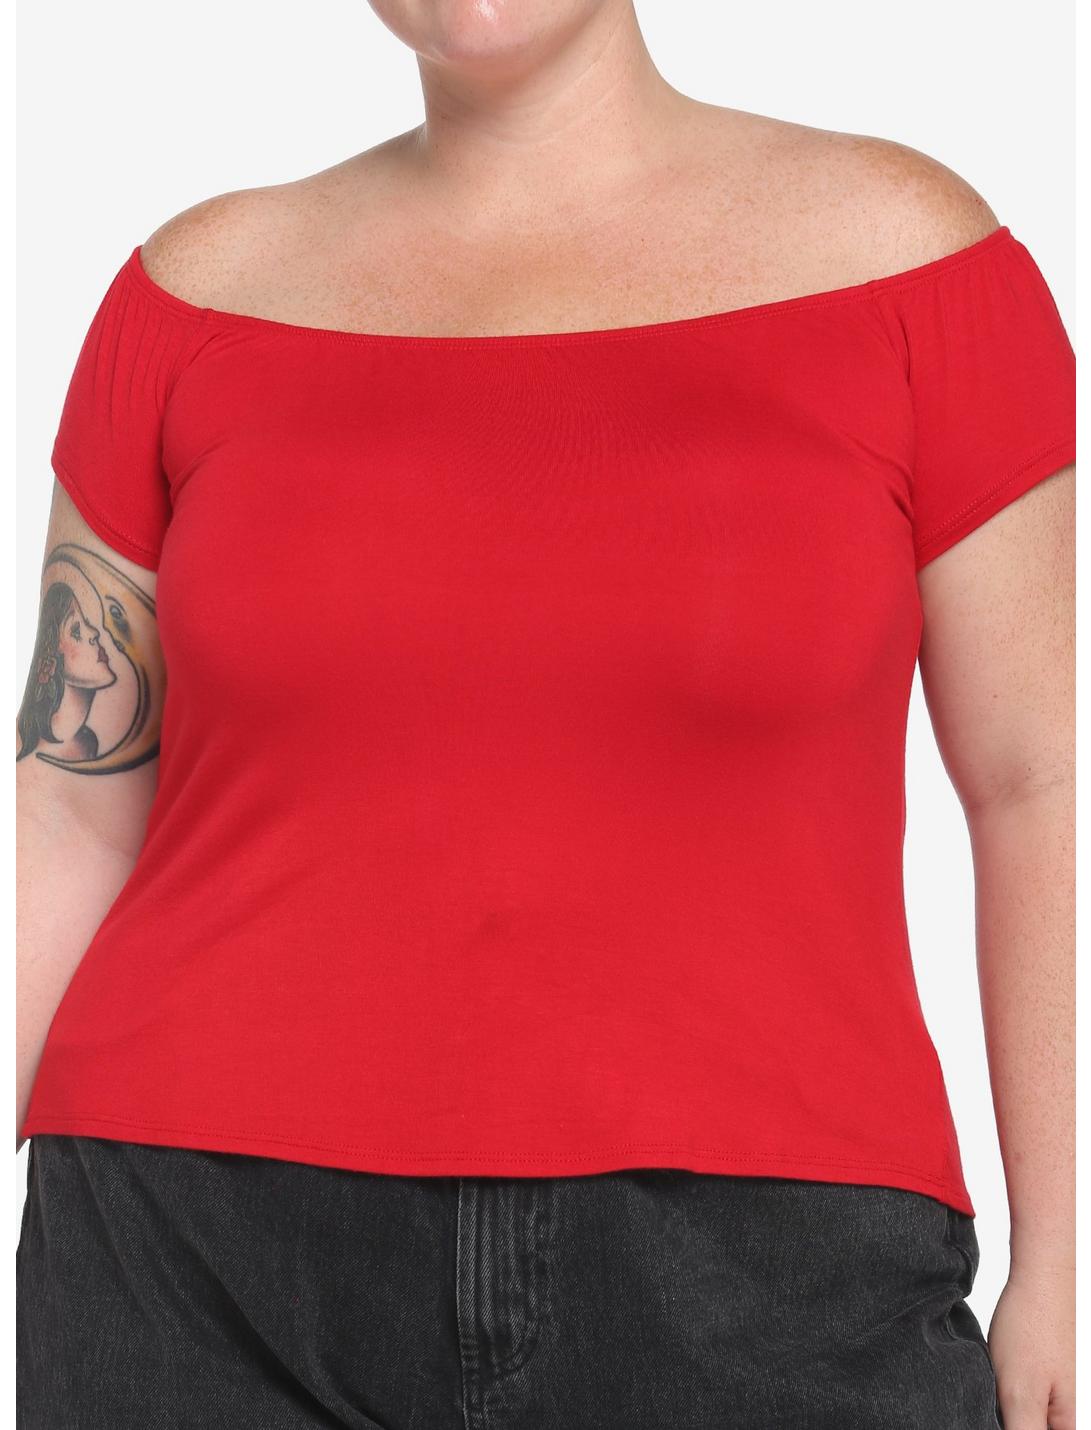 Red Off-The-Shoulder Top Plus Size, RED, hi-res